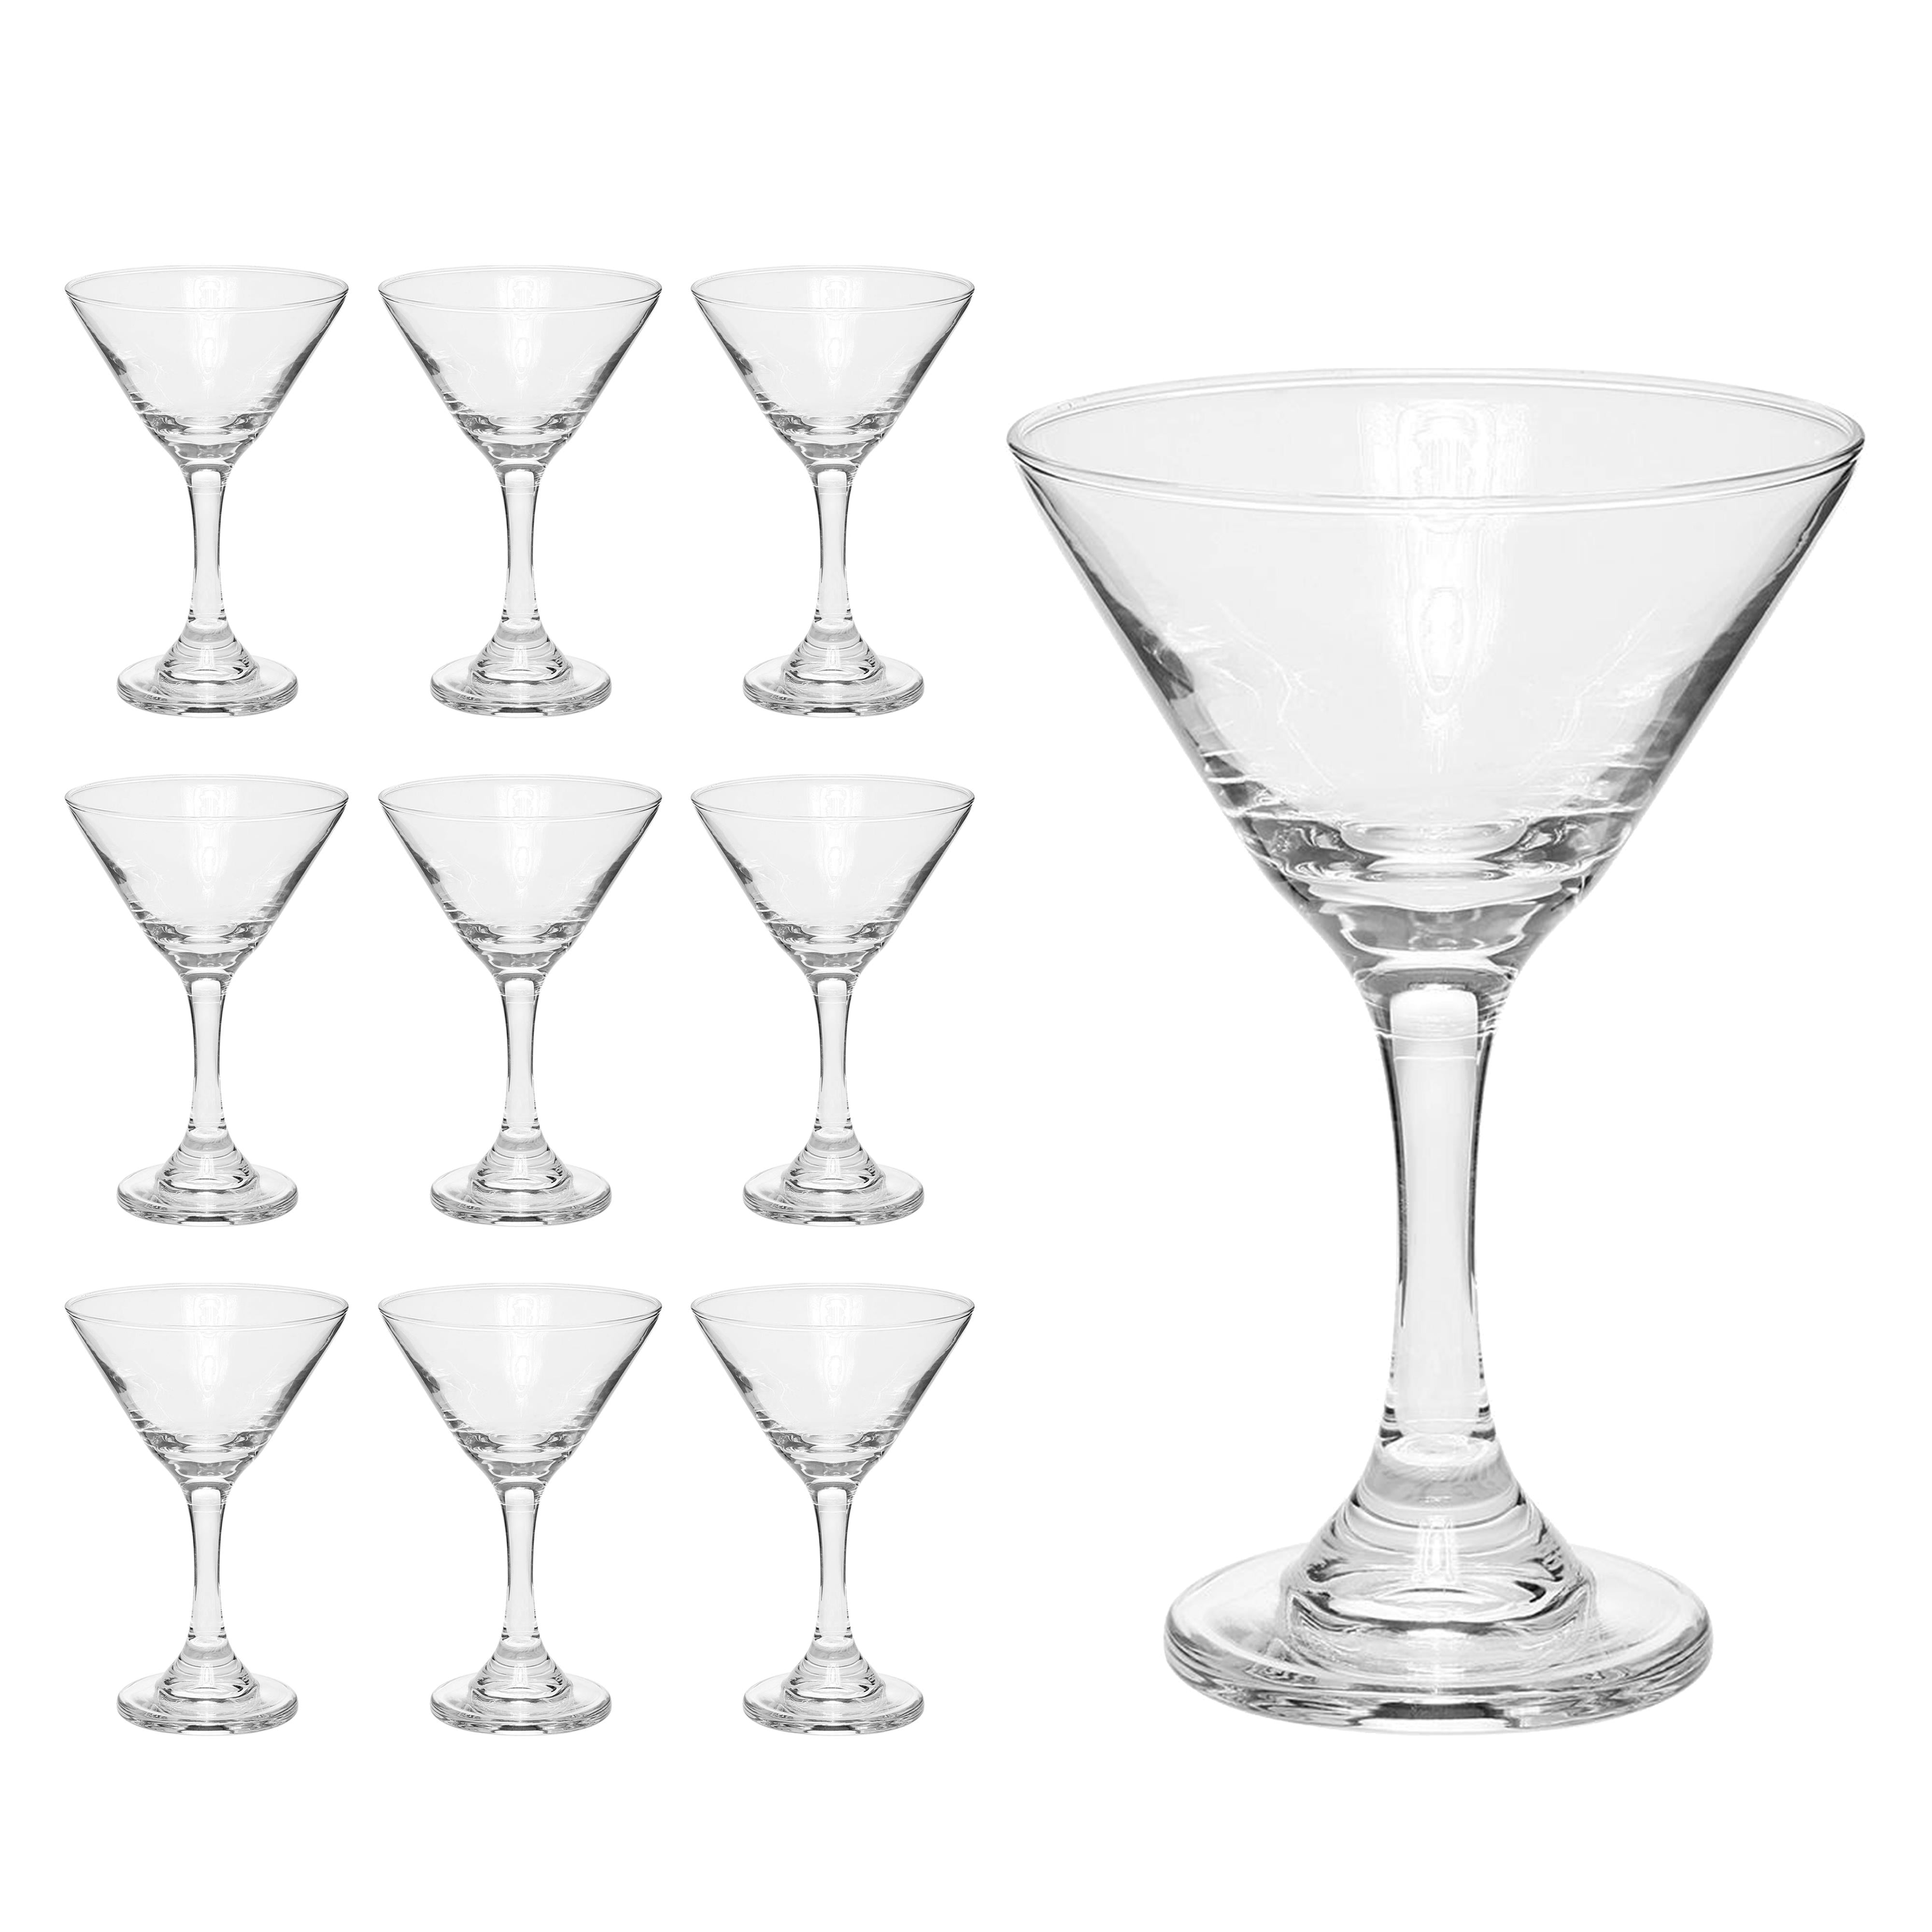 Bekith Classic Goblet Party Glasses, Wine Glasses